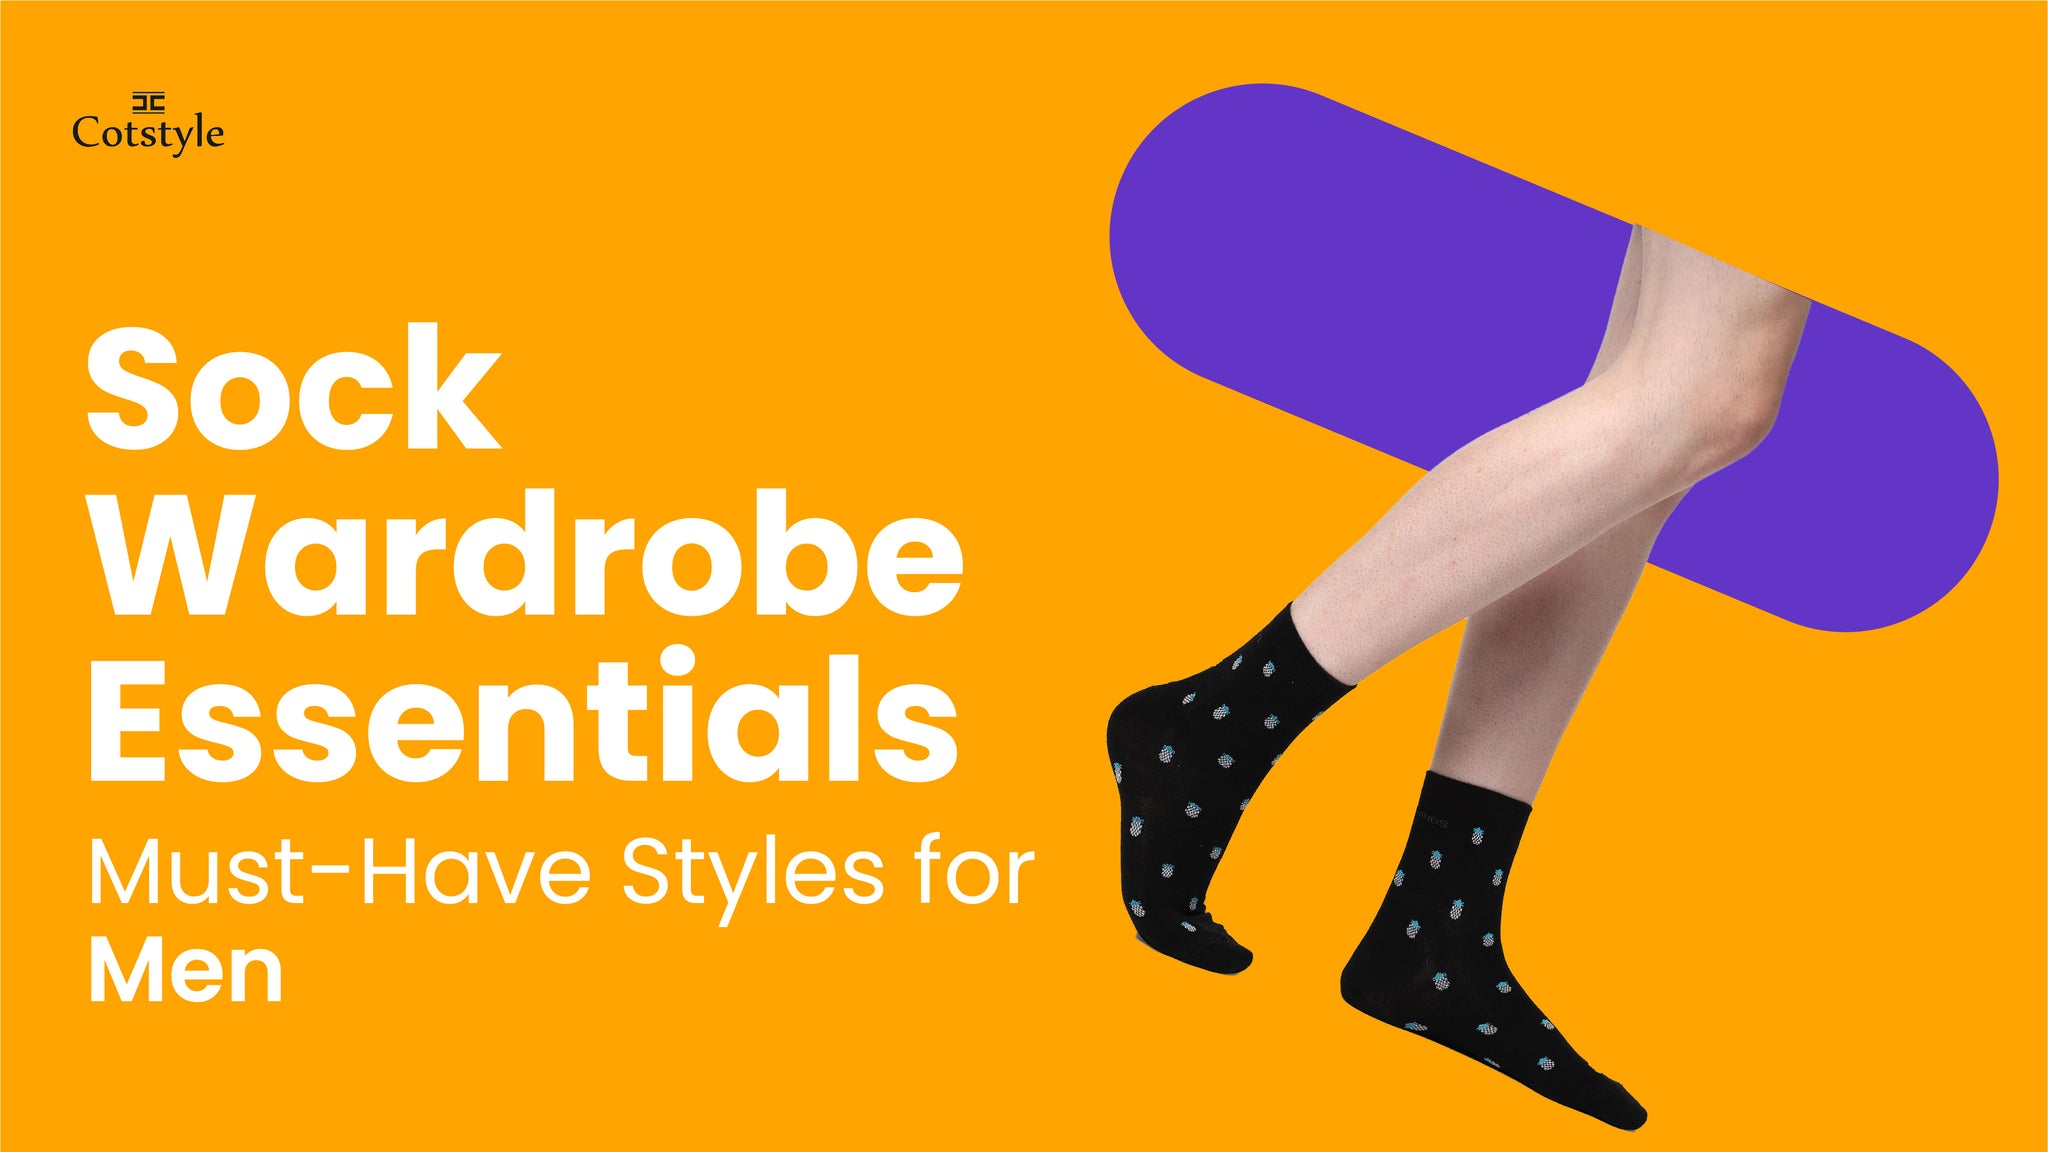 Sock Wardrobe Essentials: Must-Have Styles for Men